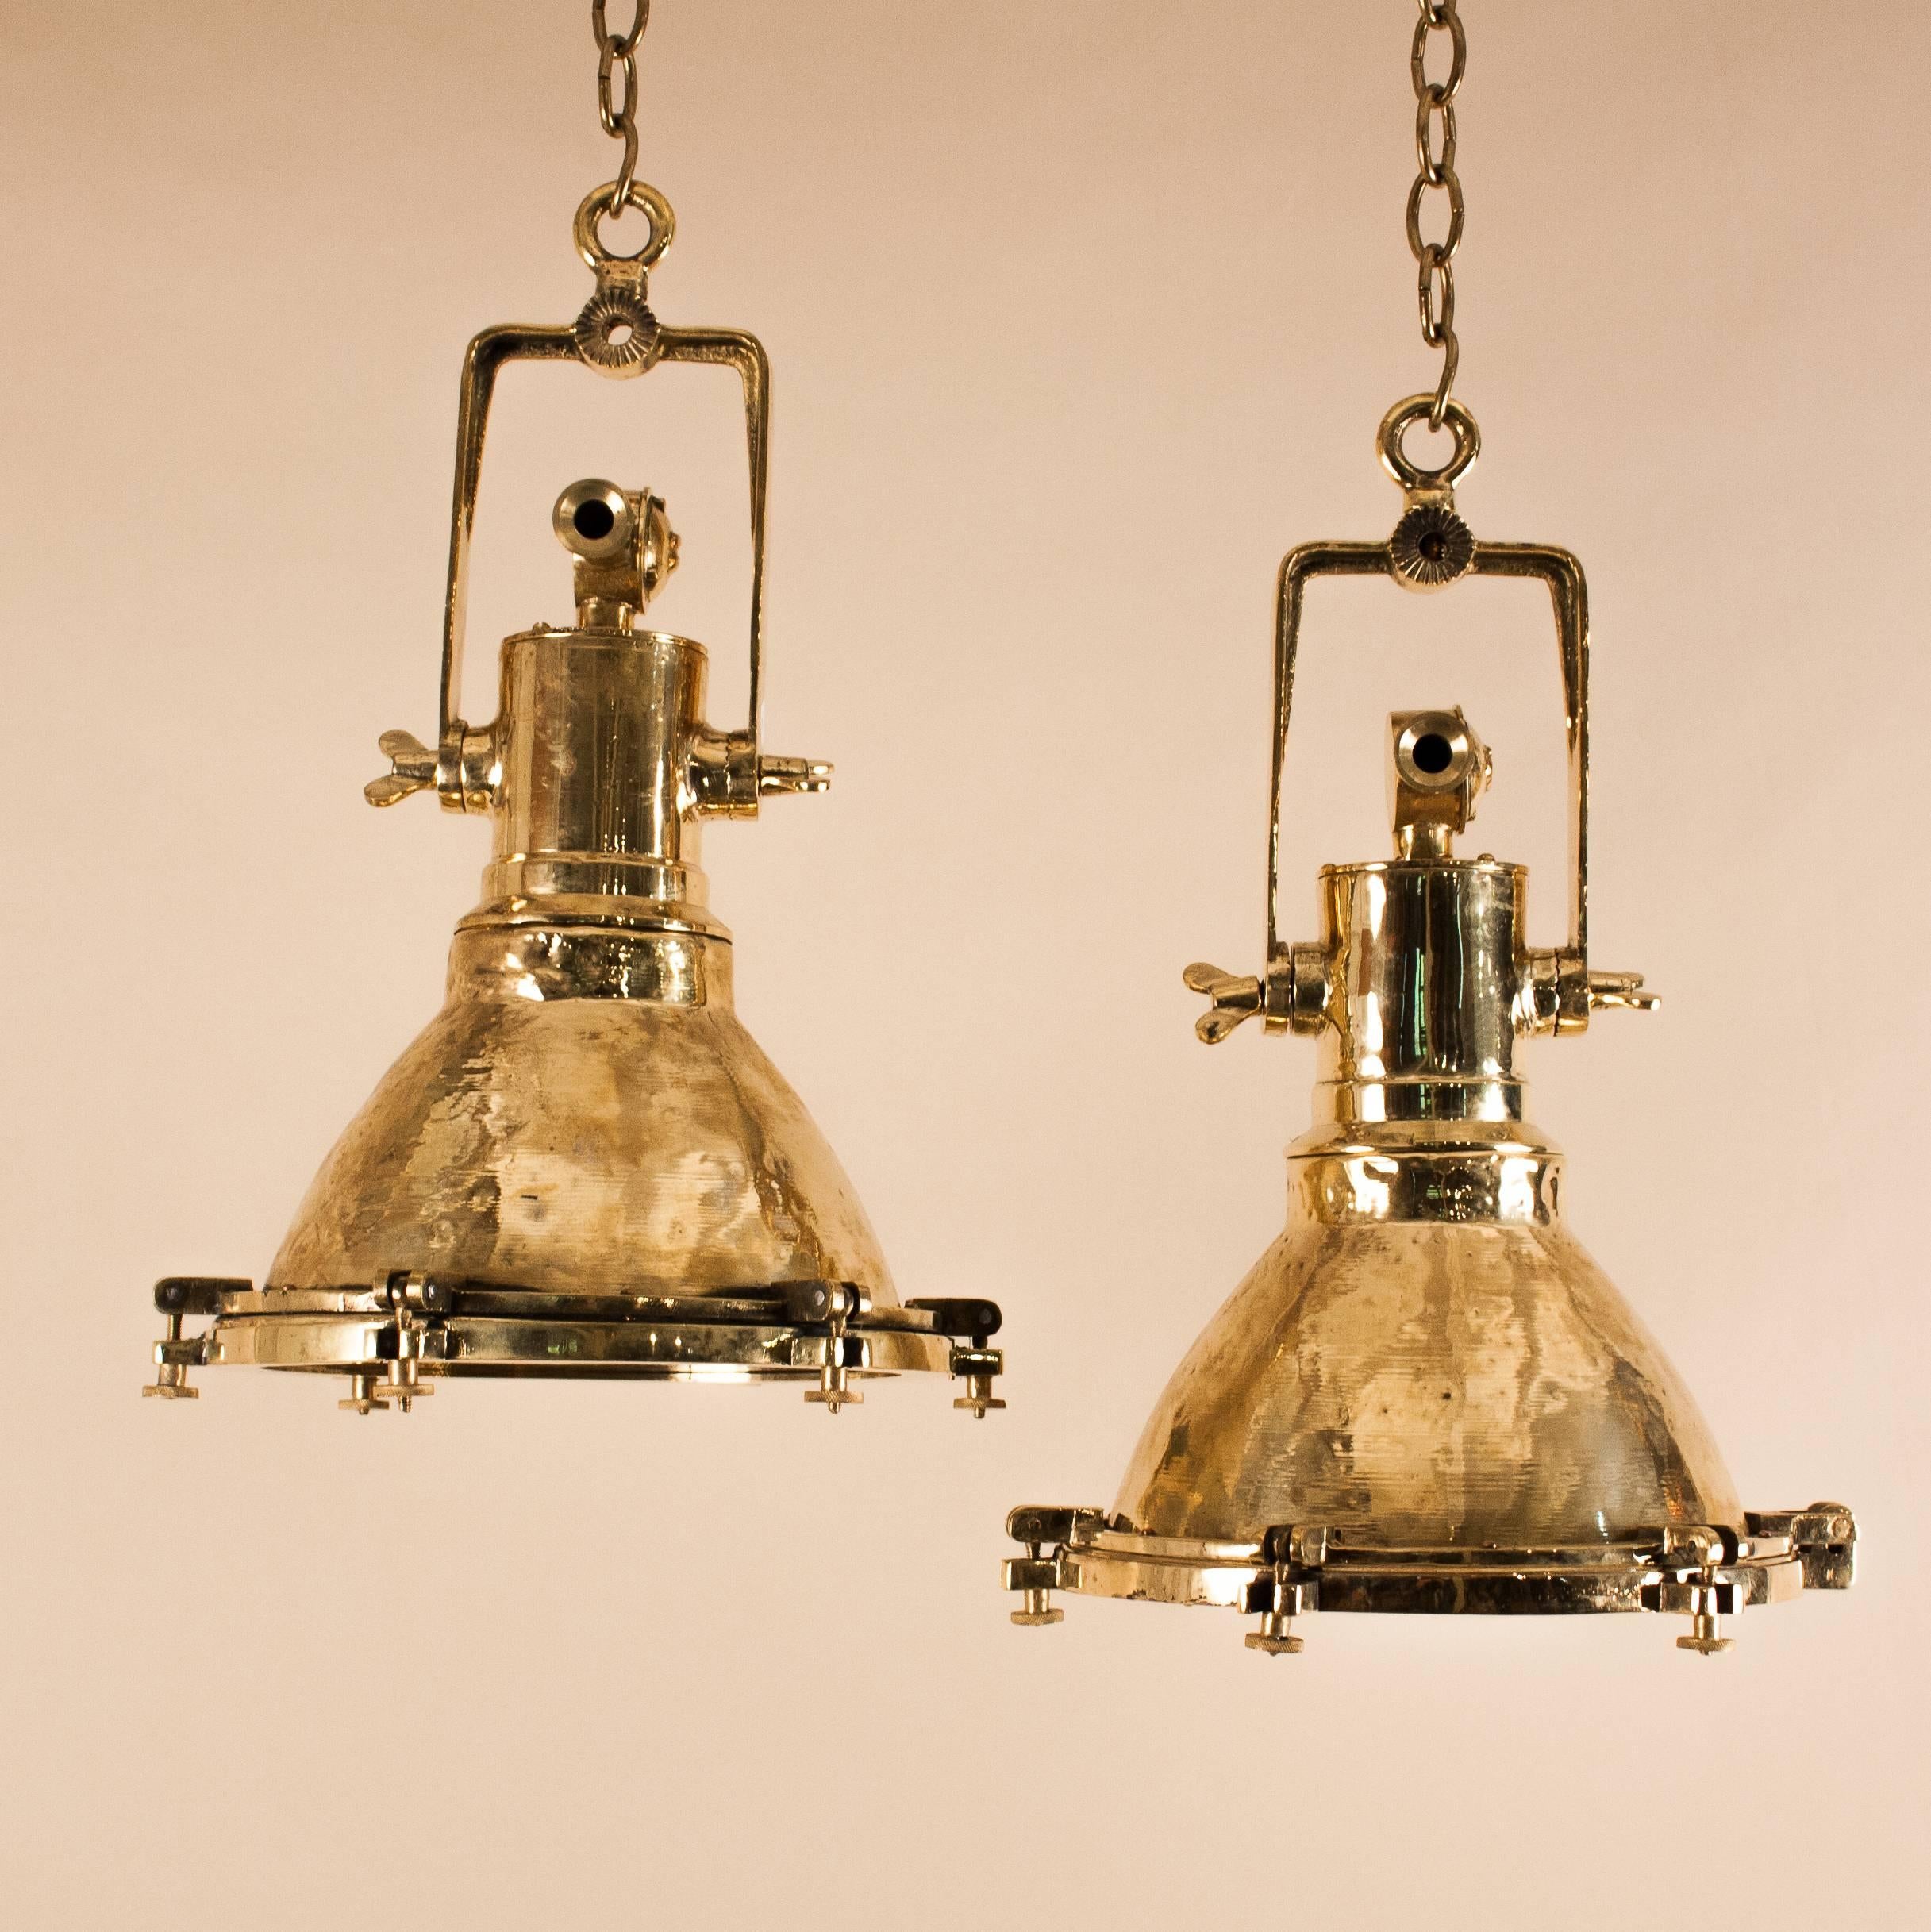 Superb pair of authentic, smaller scale nautical/Industrial pendants in polished brass with adjustable brass brackets, brass interiors and flat tempered glass lenses. These 1940s maritime lights have been attentively restored and newly rewired with